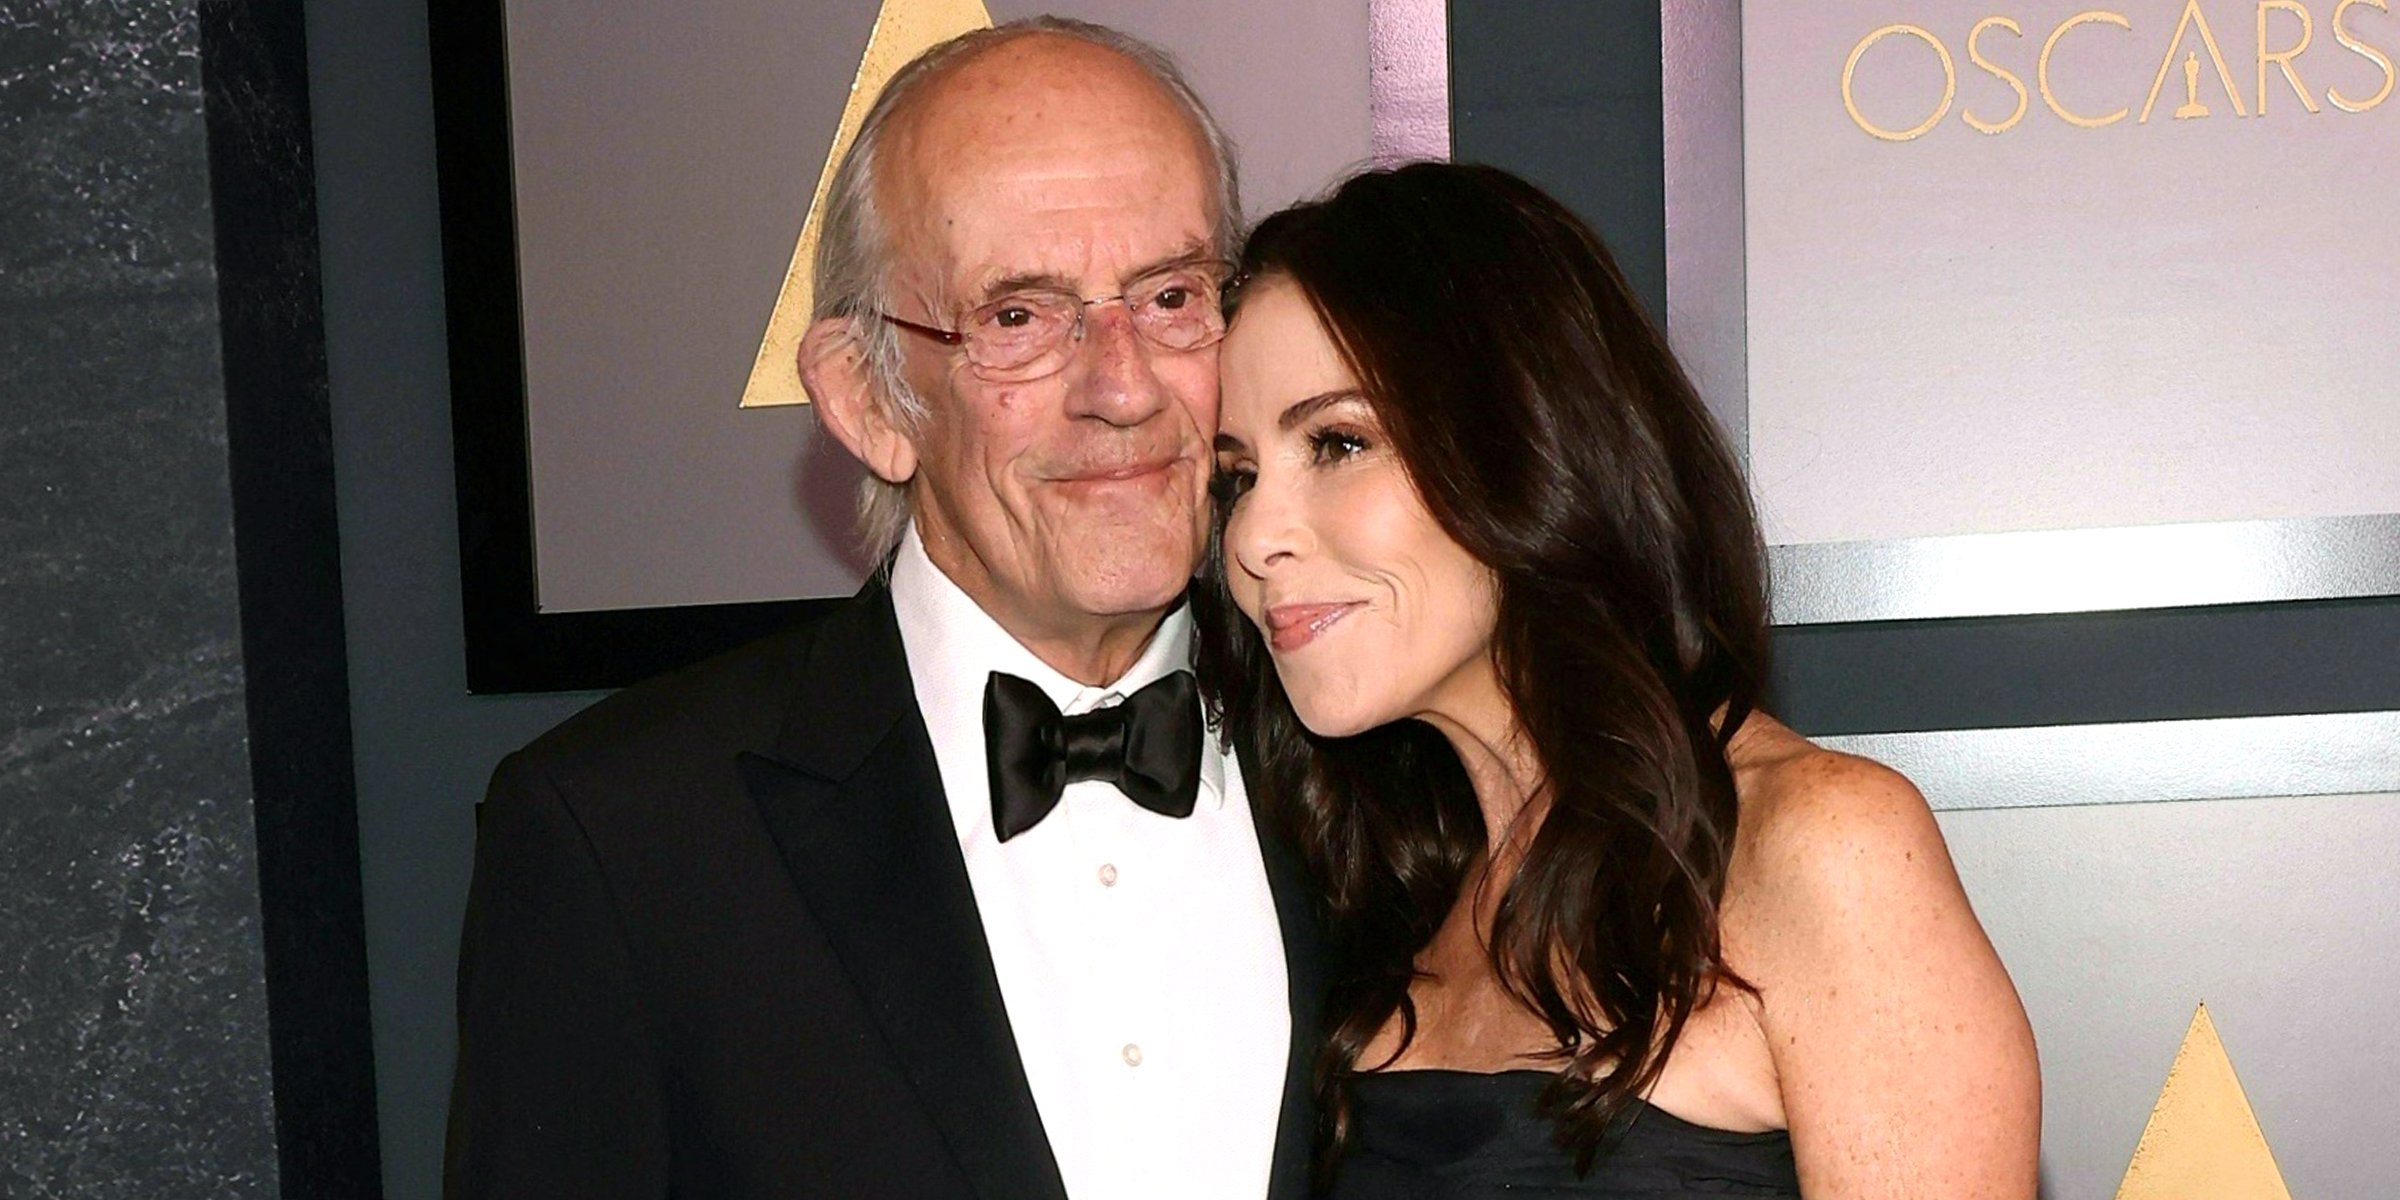 Lisa Loiacono and Christopher Lloyd | Source: Getty Images